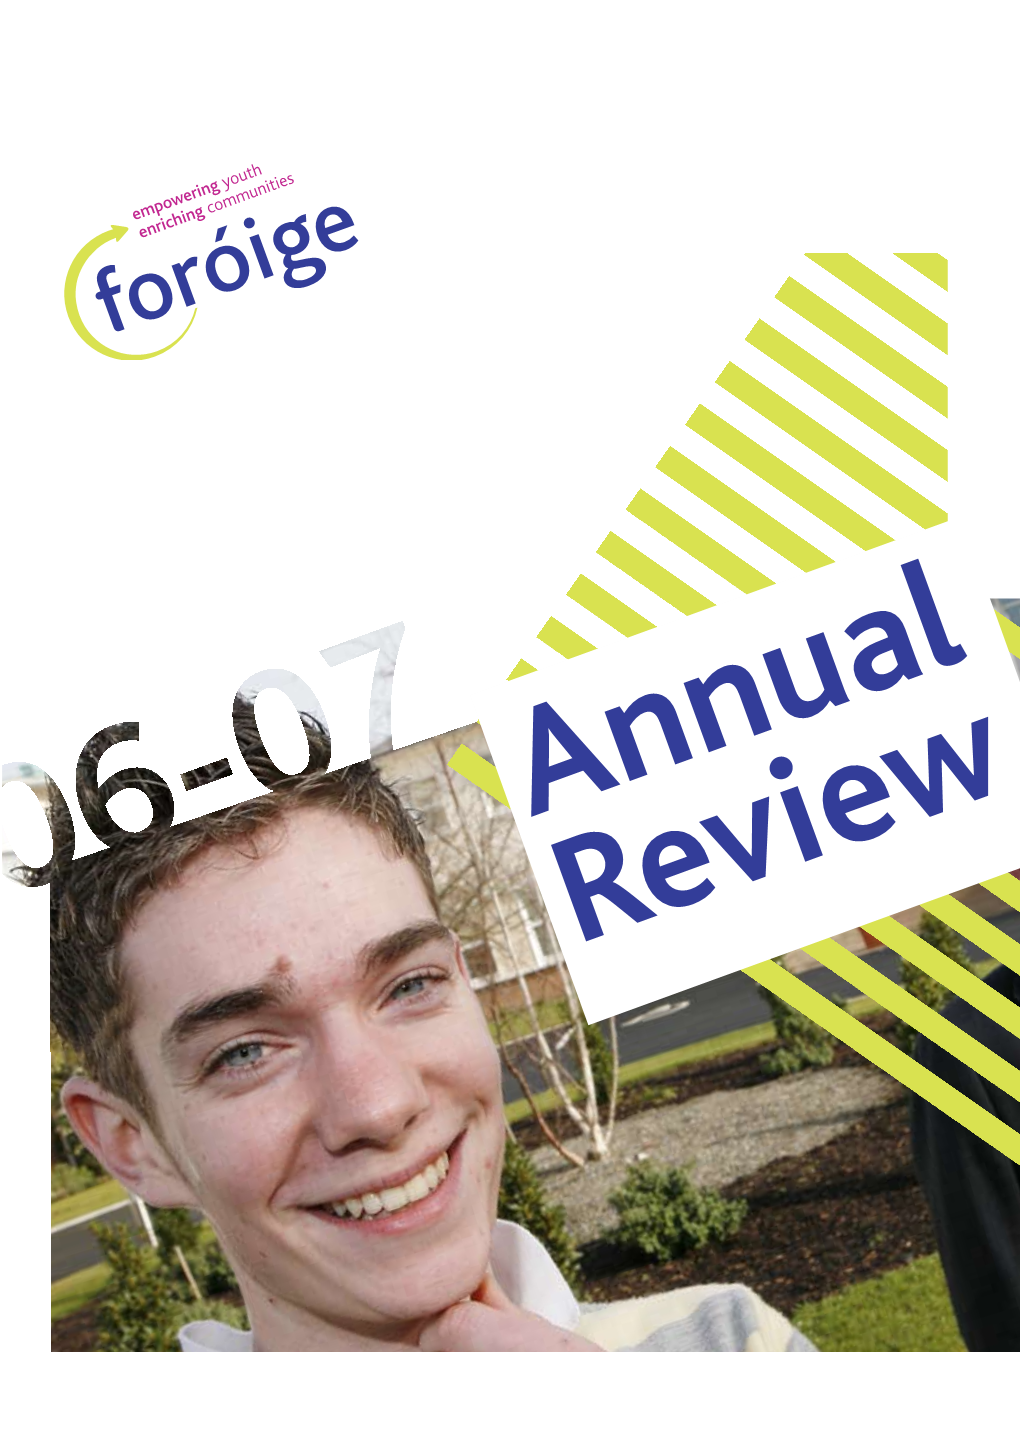 Annual Review Contents